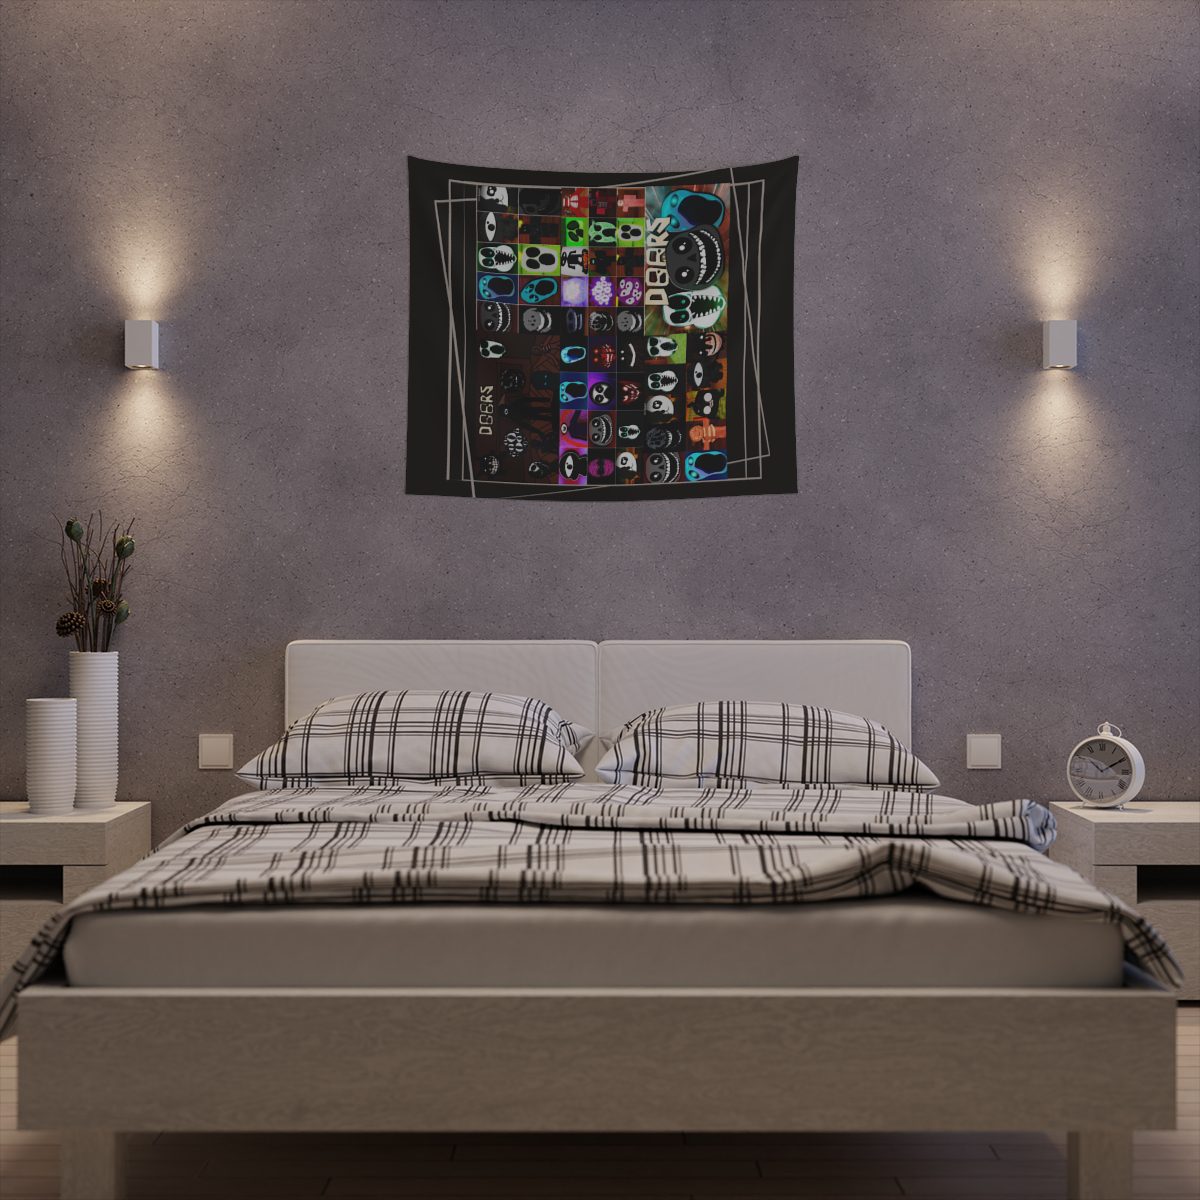 Invite your friends to a terrifying Halloween party with the DOOR ROBLOX horror tapestries.  Printed Wall Tapestry Cool Kiddo 20